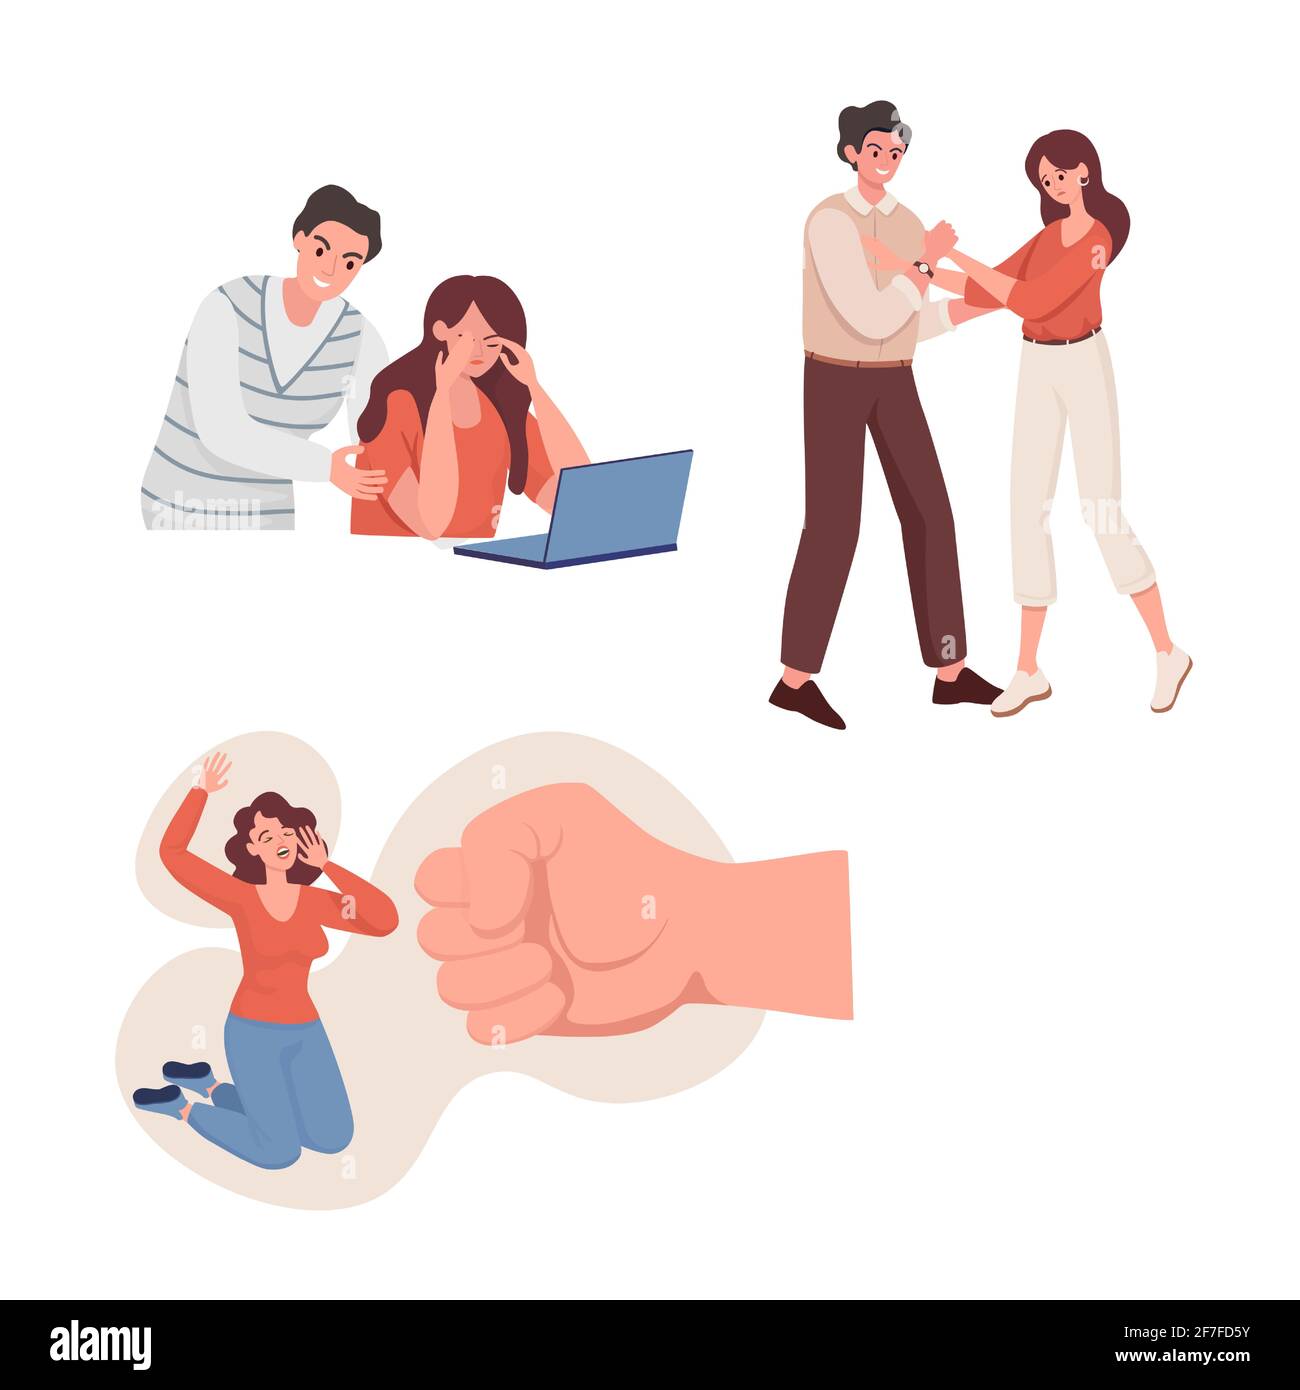 Emotional abuse and domestic violence vector flat illustration. Aggressive man yelling at his wife, woman against big fist, husband holding woman hands. Family, social violence problems concept. Stock Vector